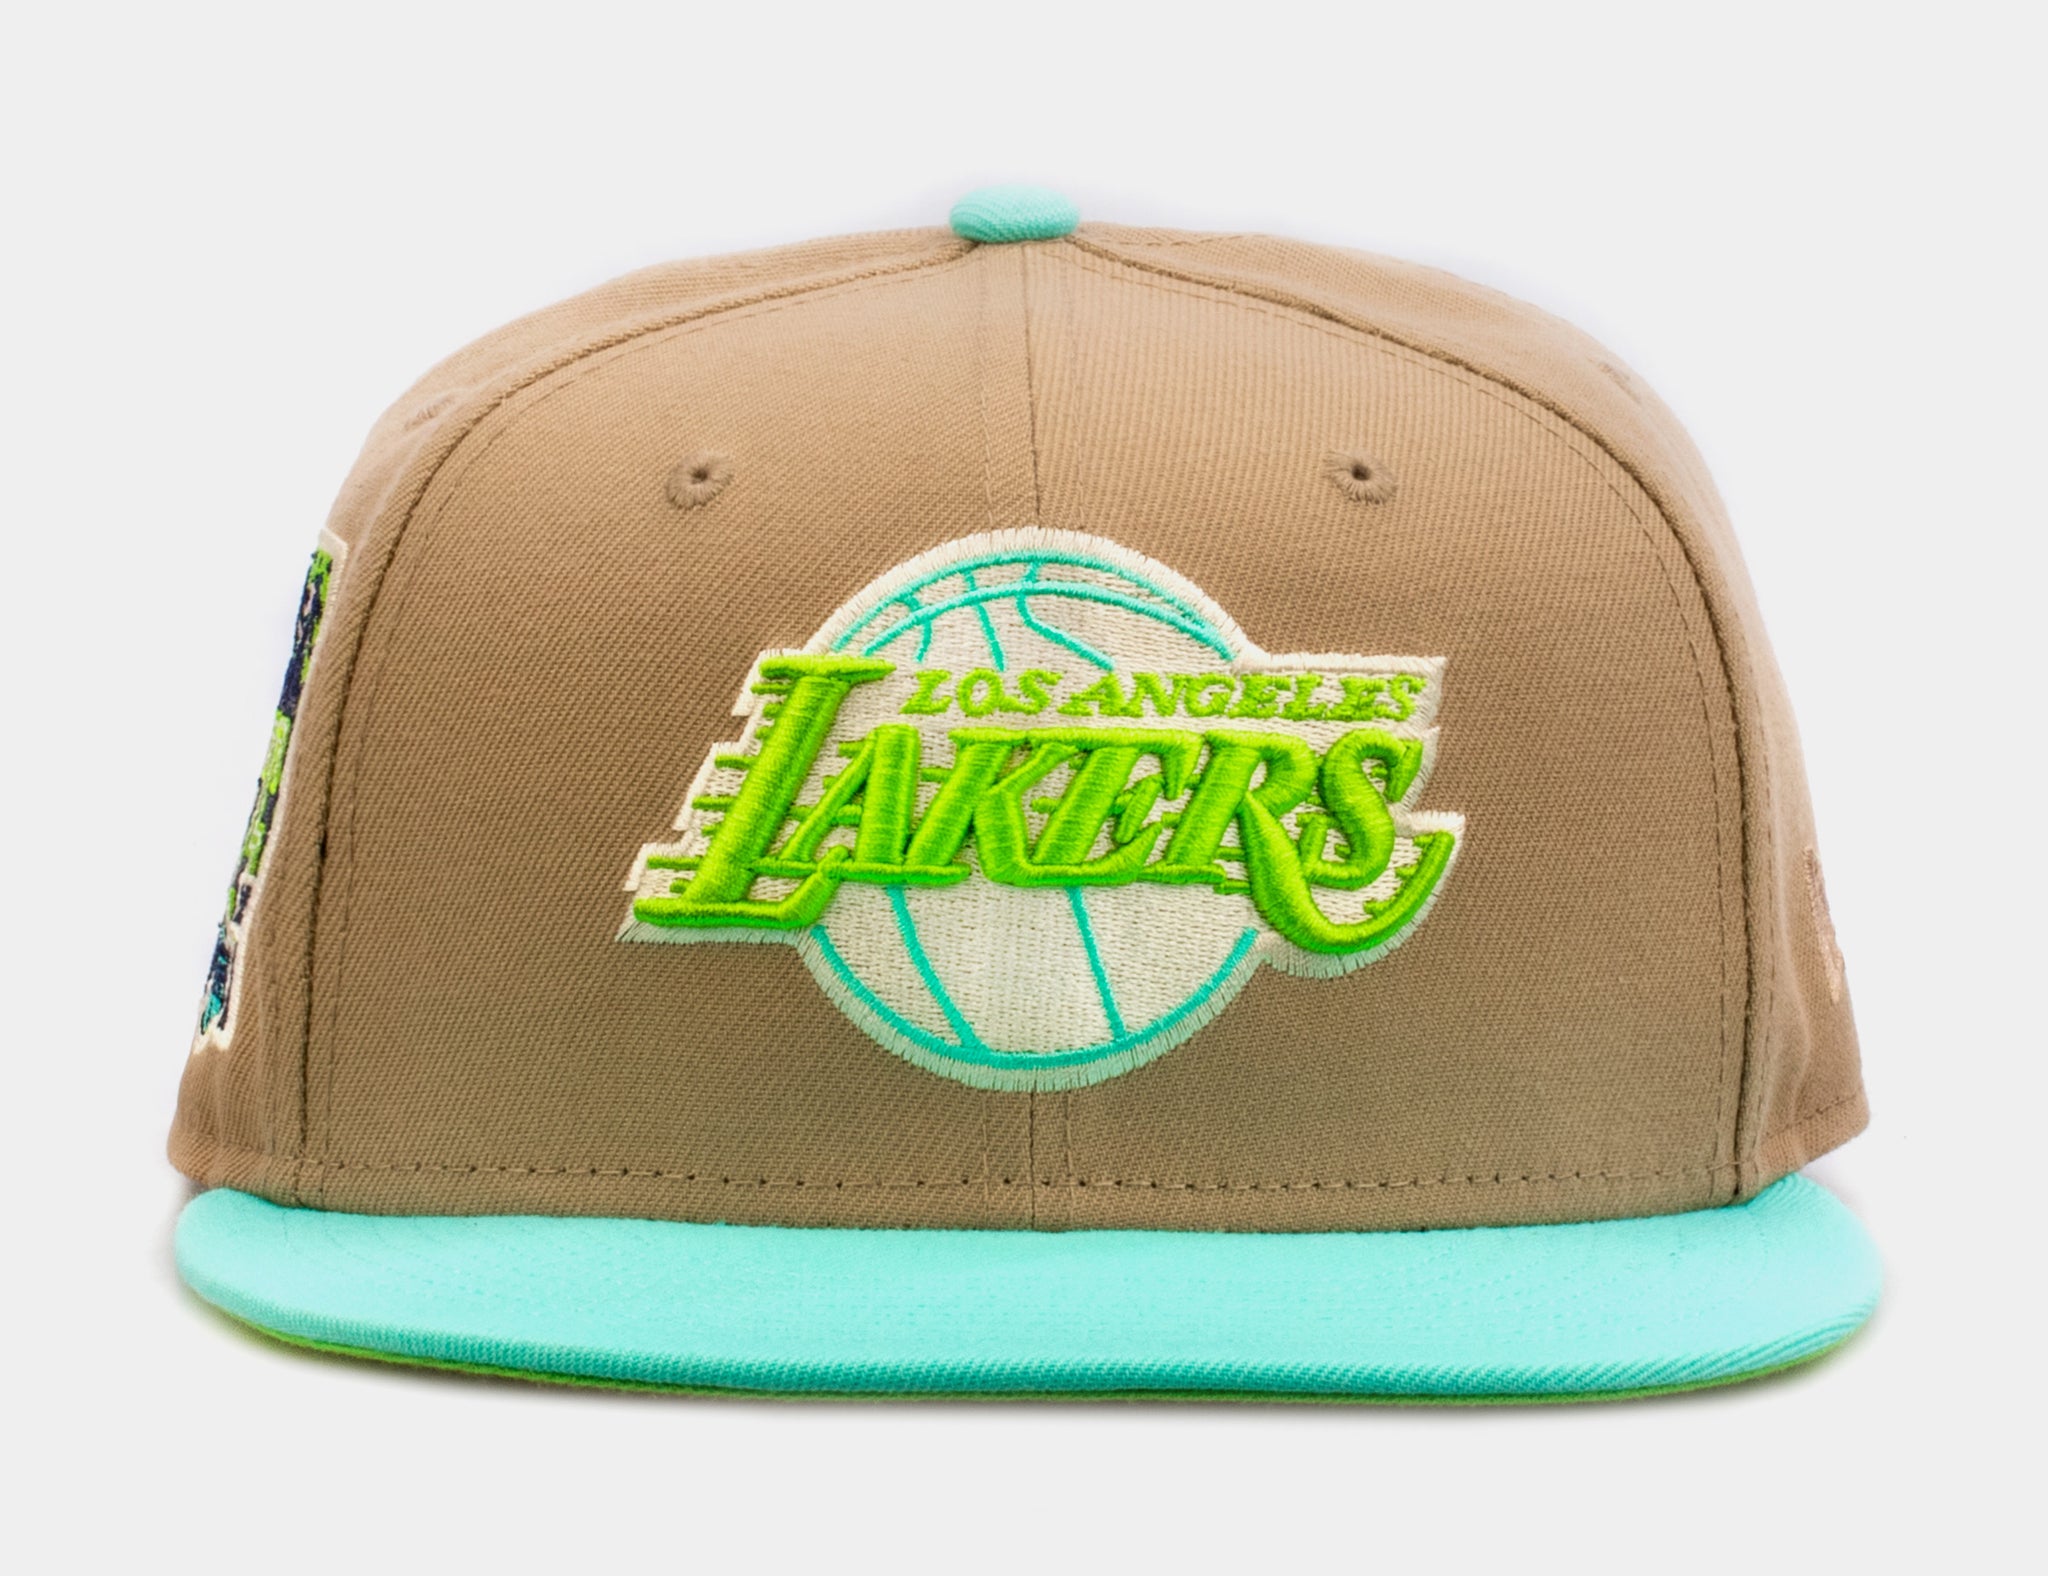 New Era Caps Los Angeles Lakers 59FIFTY Fitted Hat White/Blue